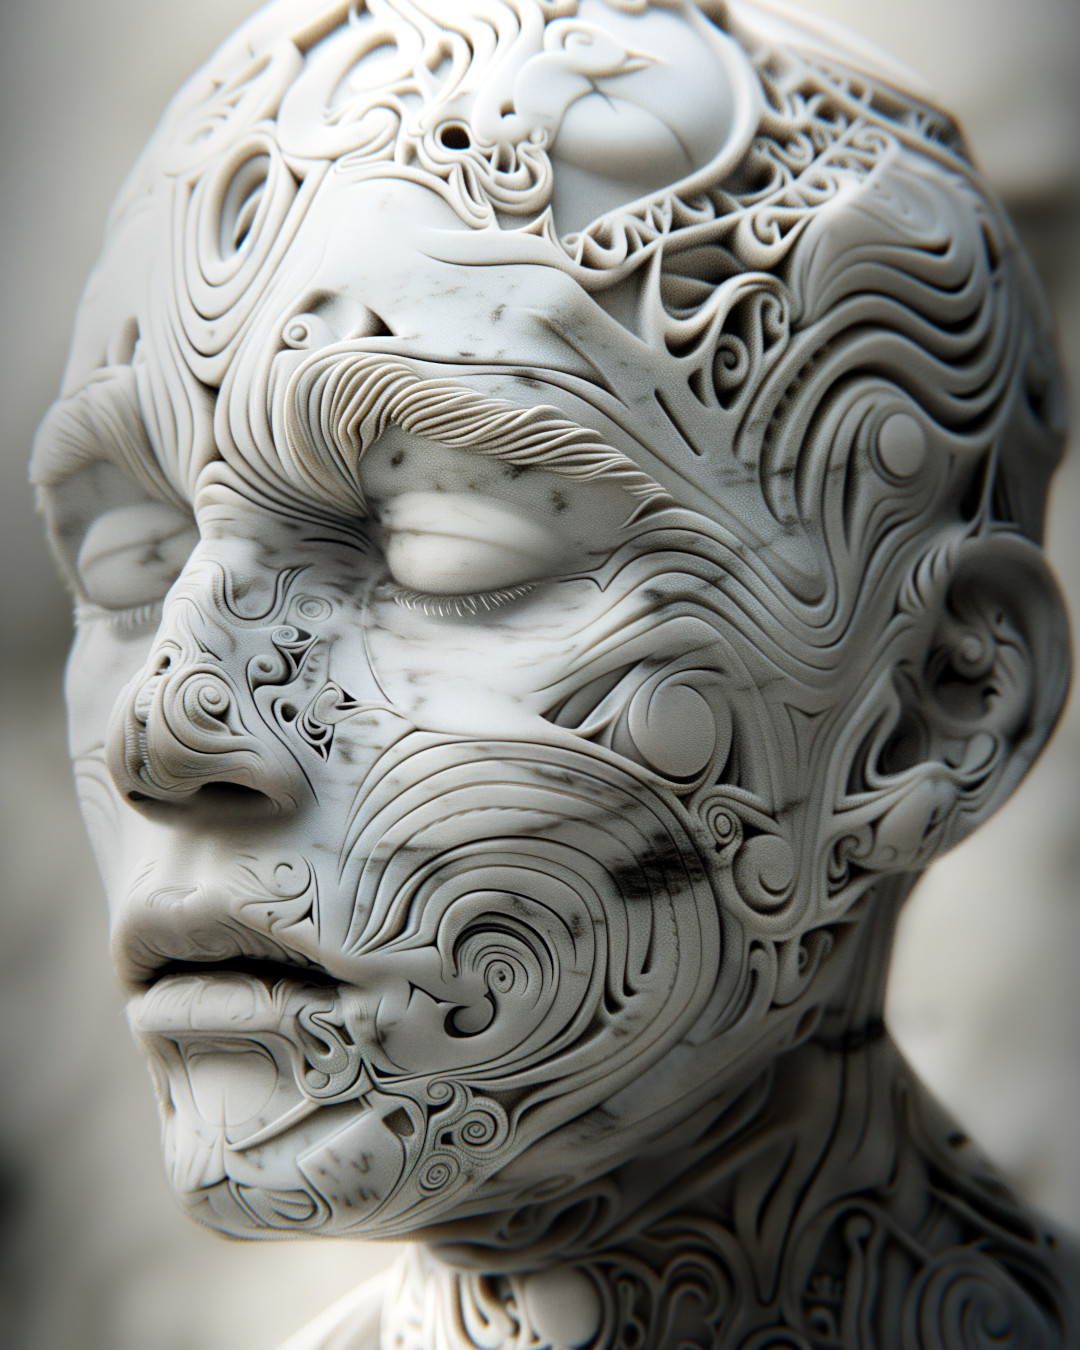 Man's head, swirling patterns carved, white marble